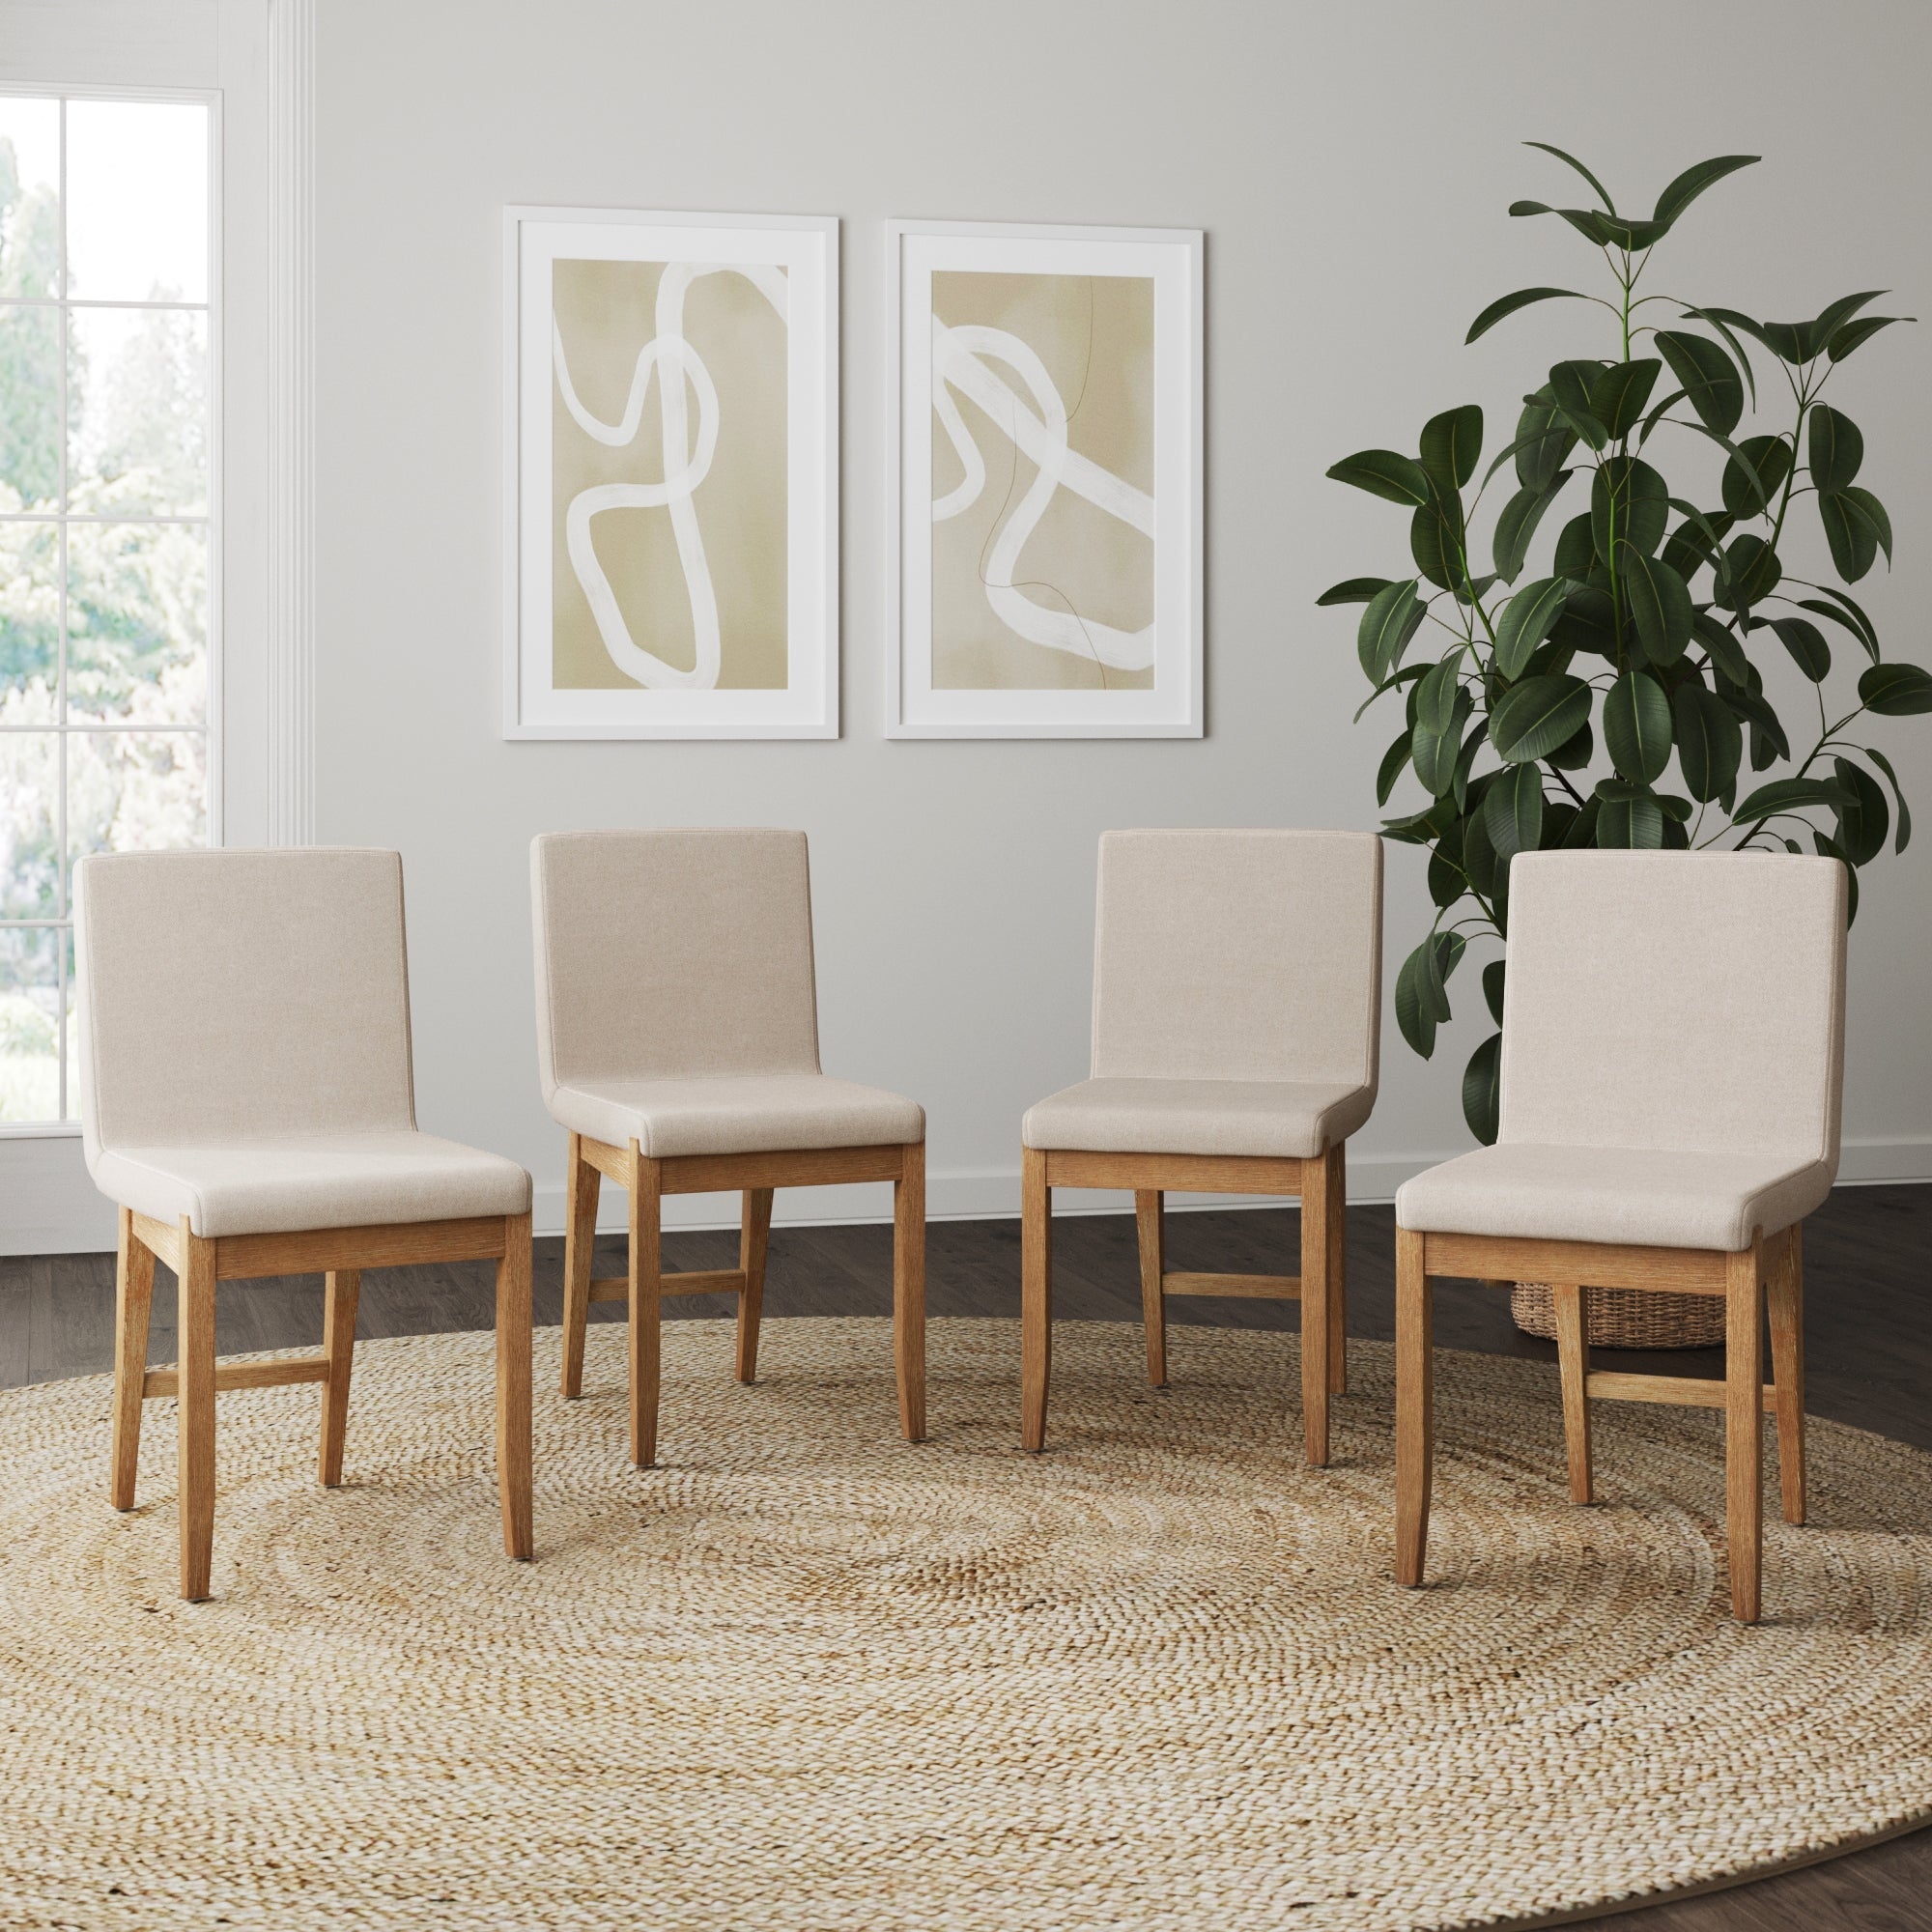 Set of 4 Dining Chairs Light Brown Flax